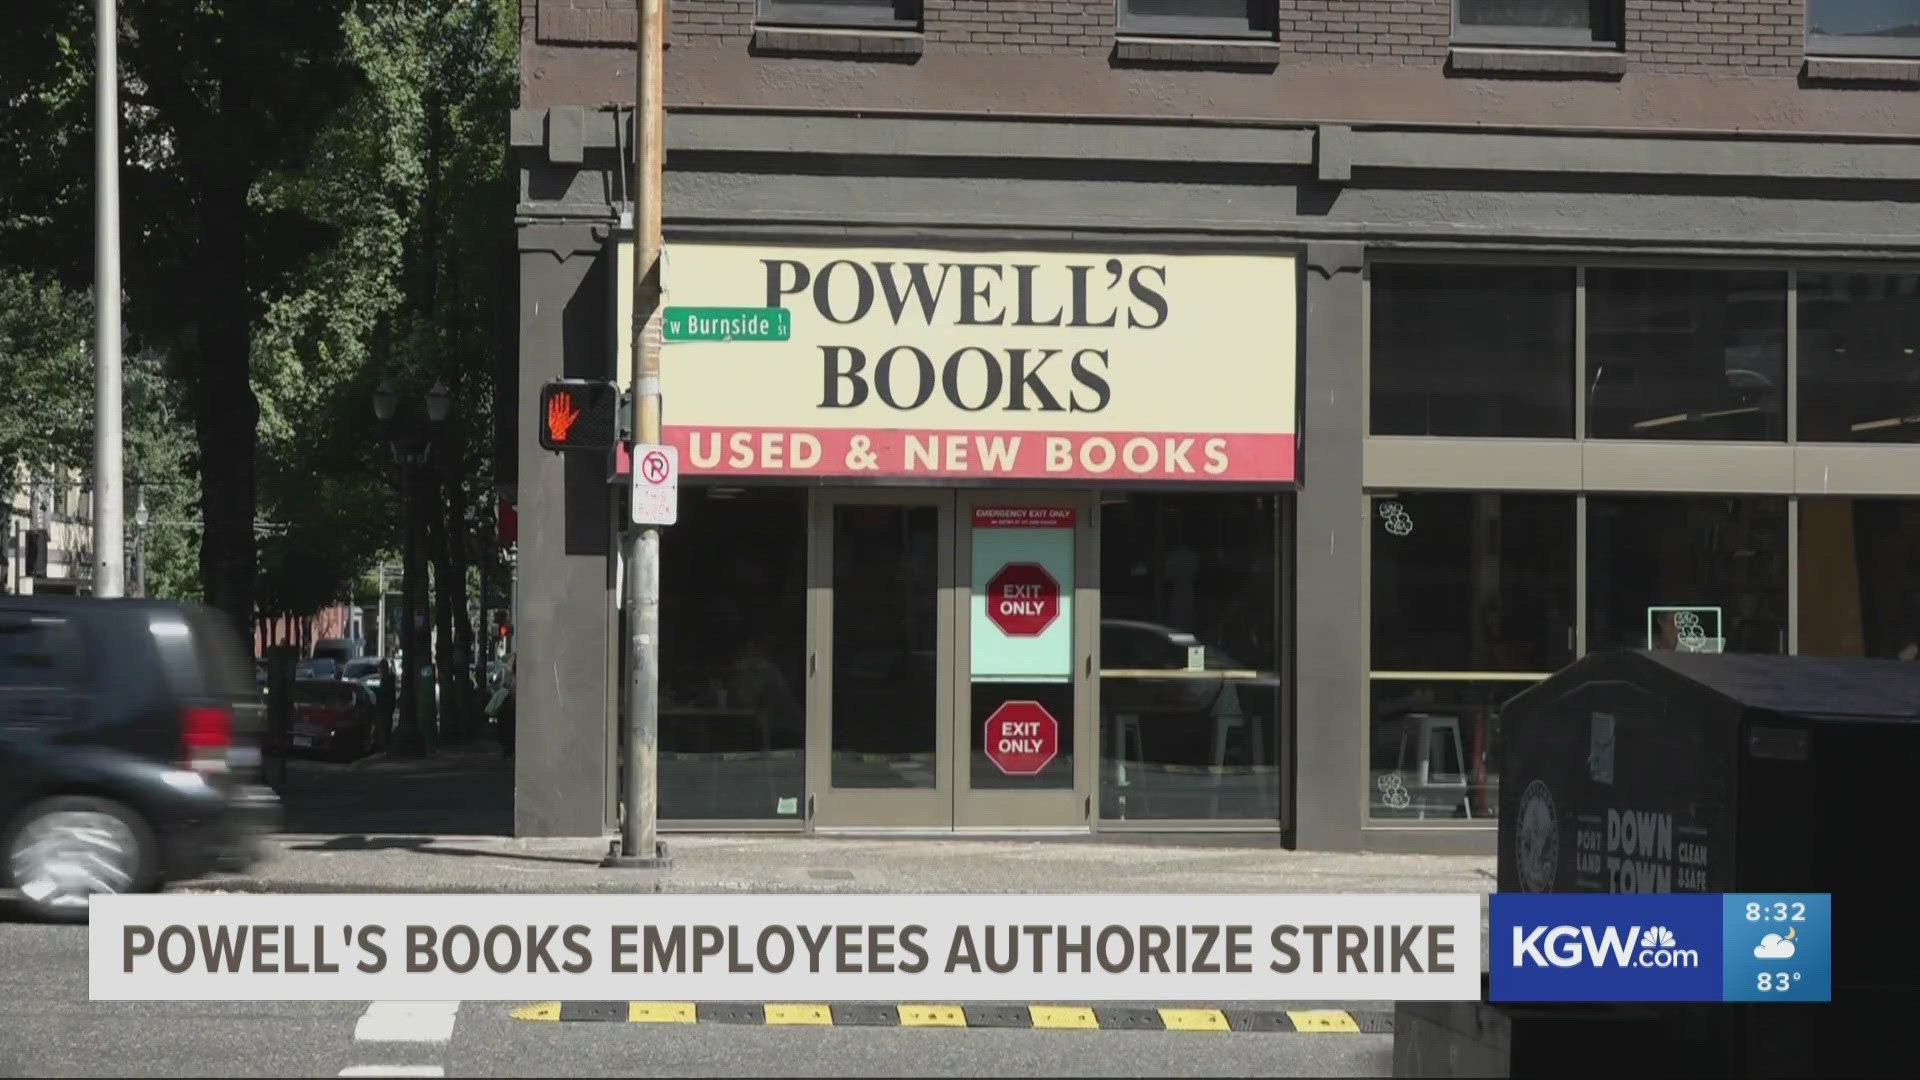 The union said that it wants to continue negotiations for a living wage, but will call a strike if need be. Powell’s said they “remain committed” to bargaining.